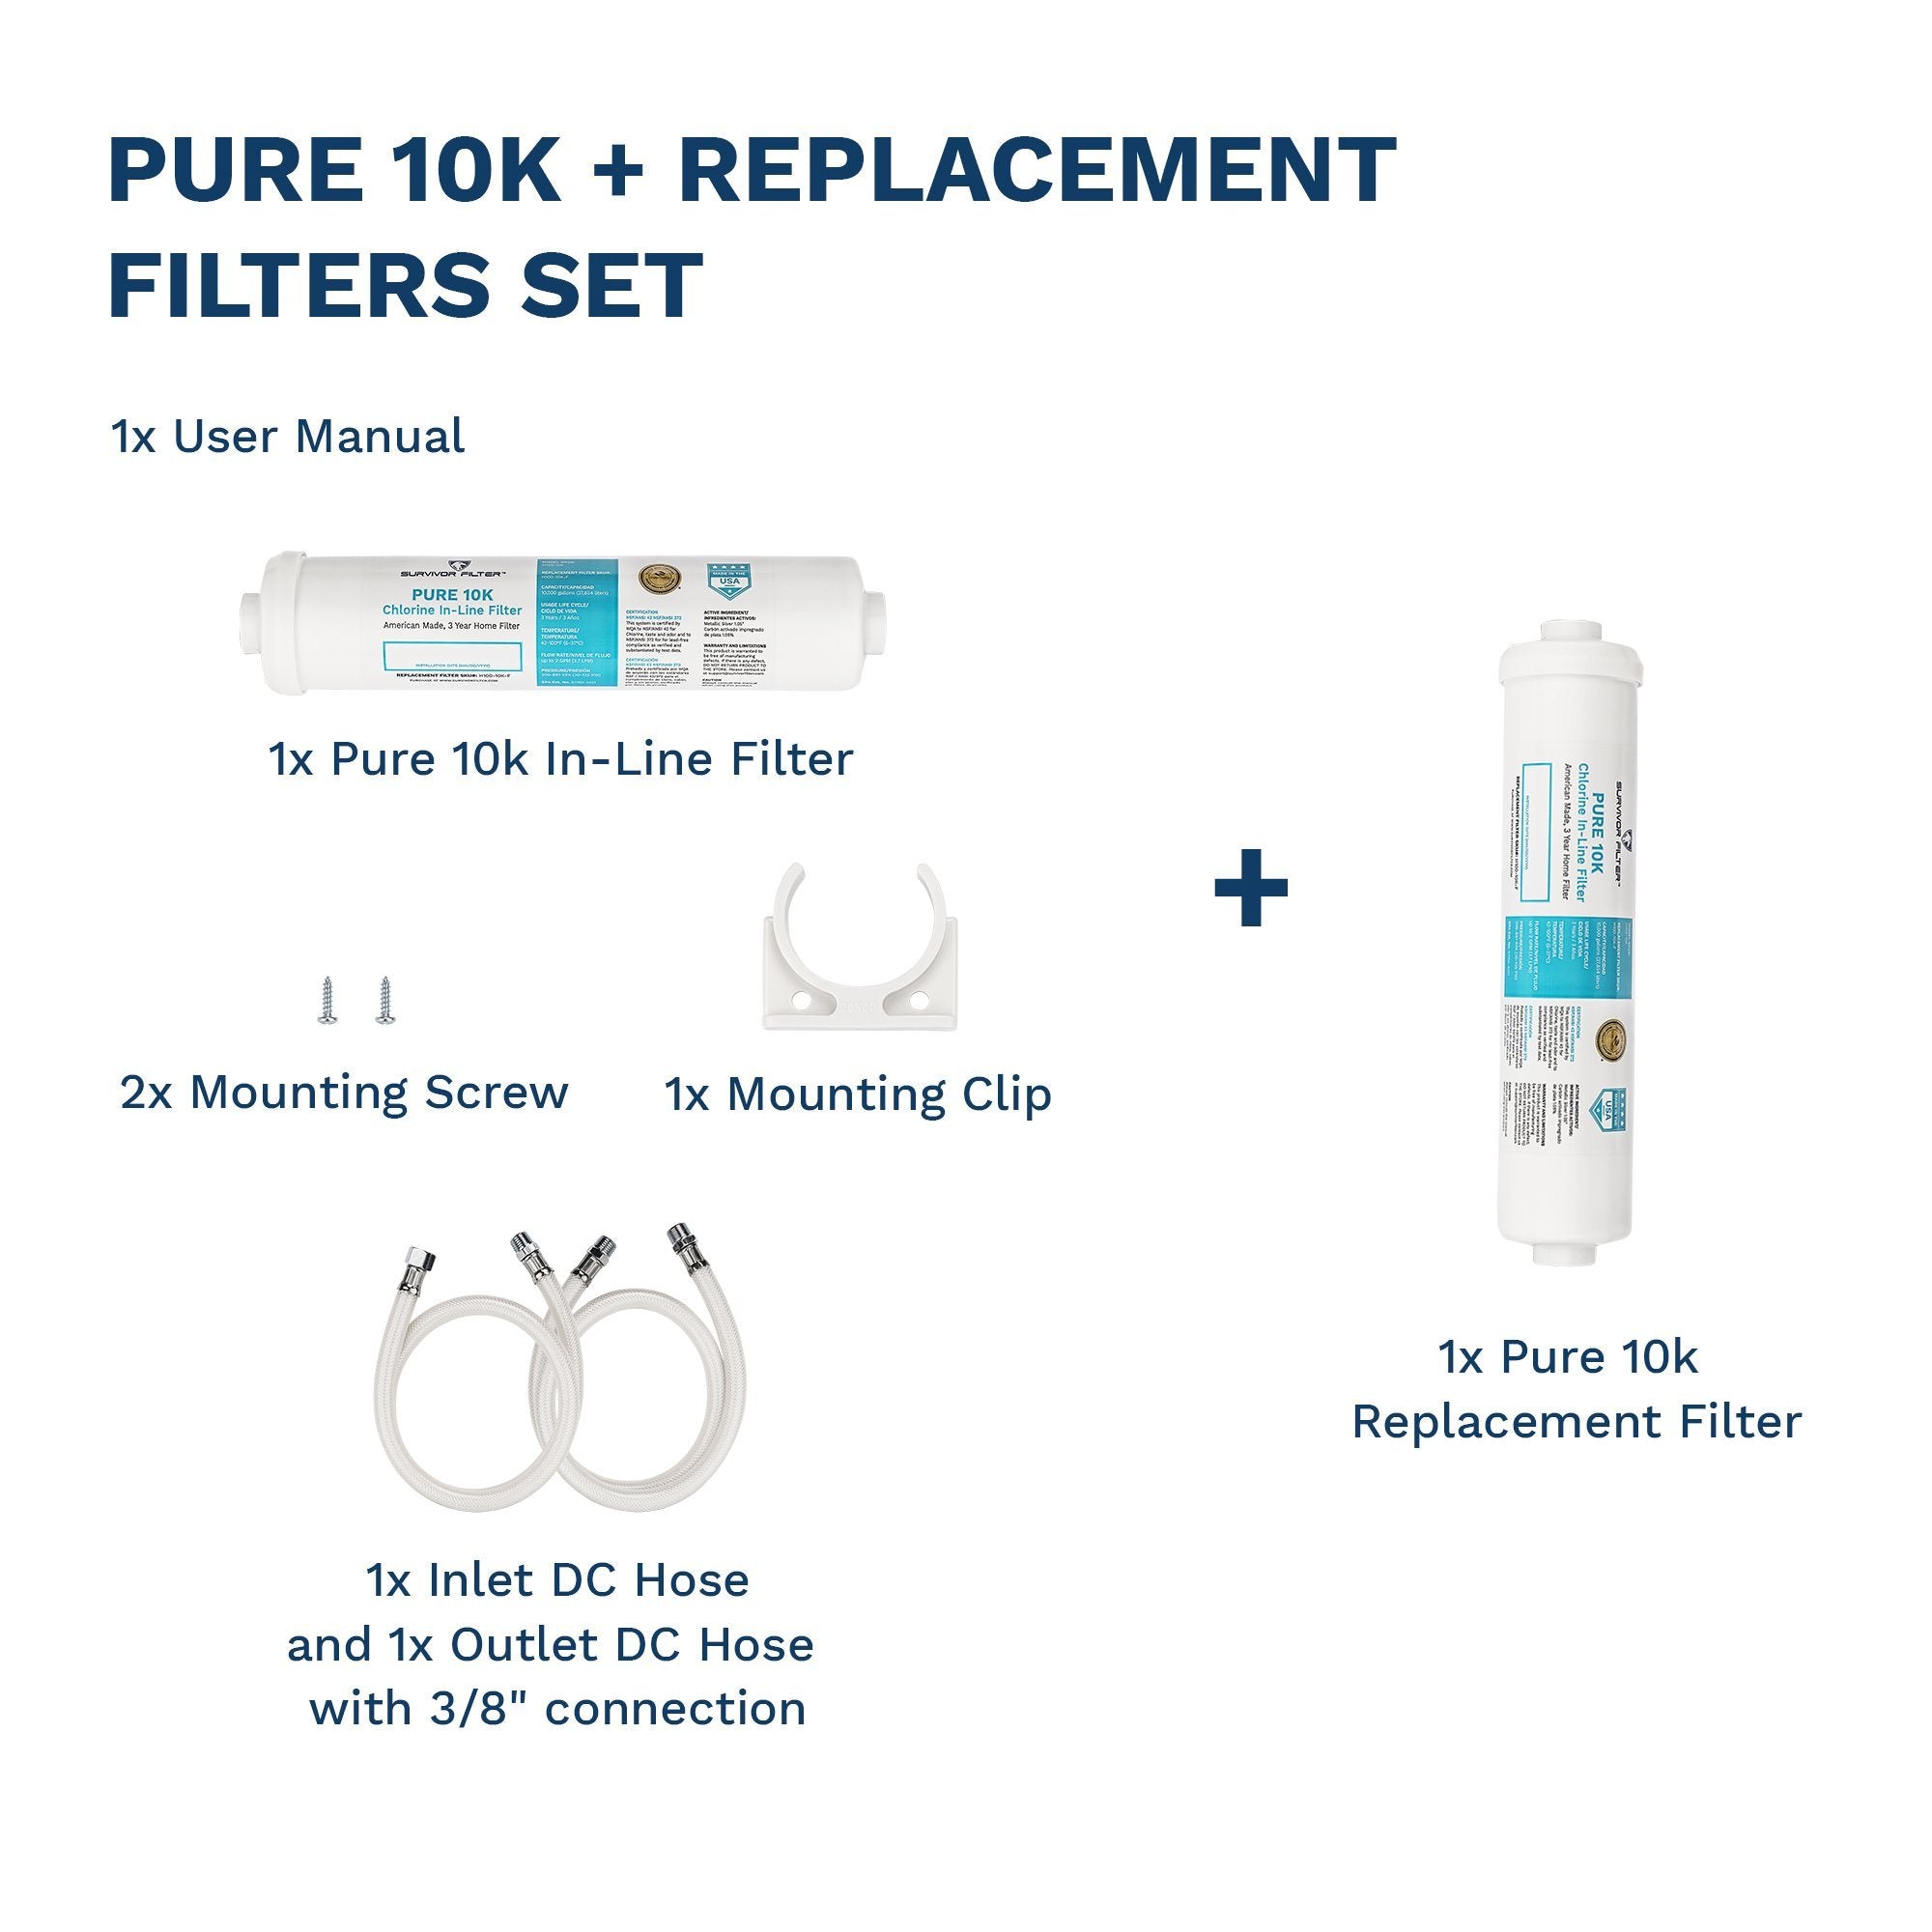 Pure 10K and Replacement Filter Set